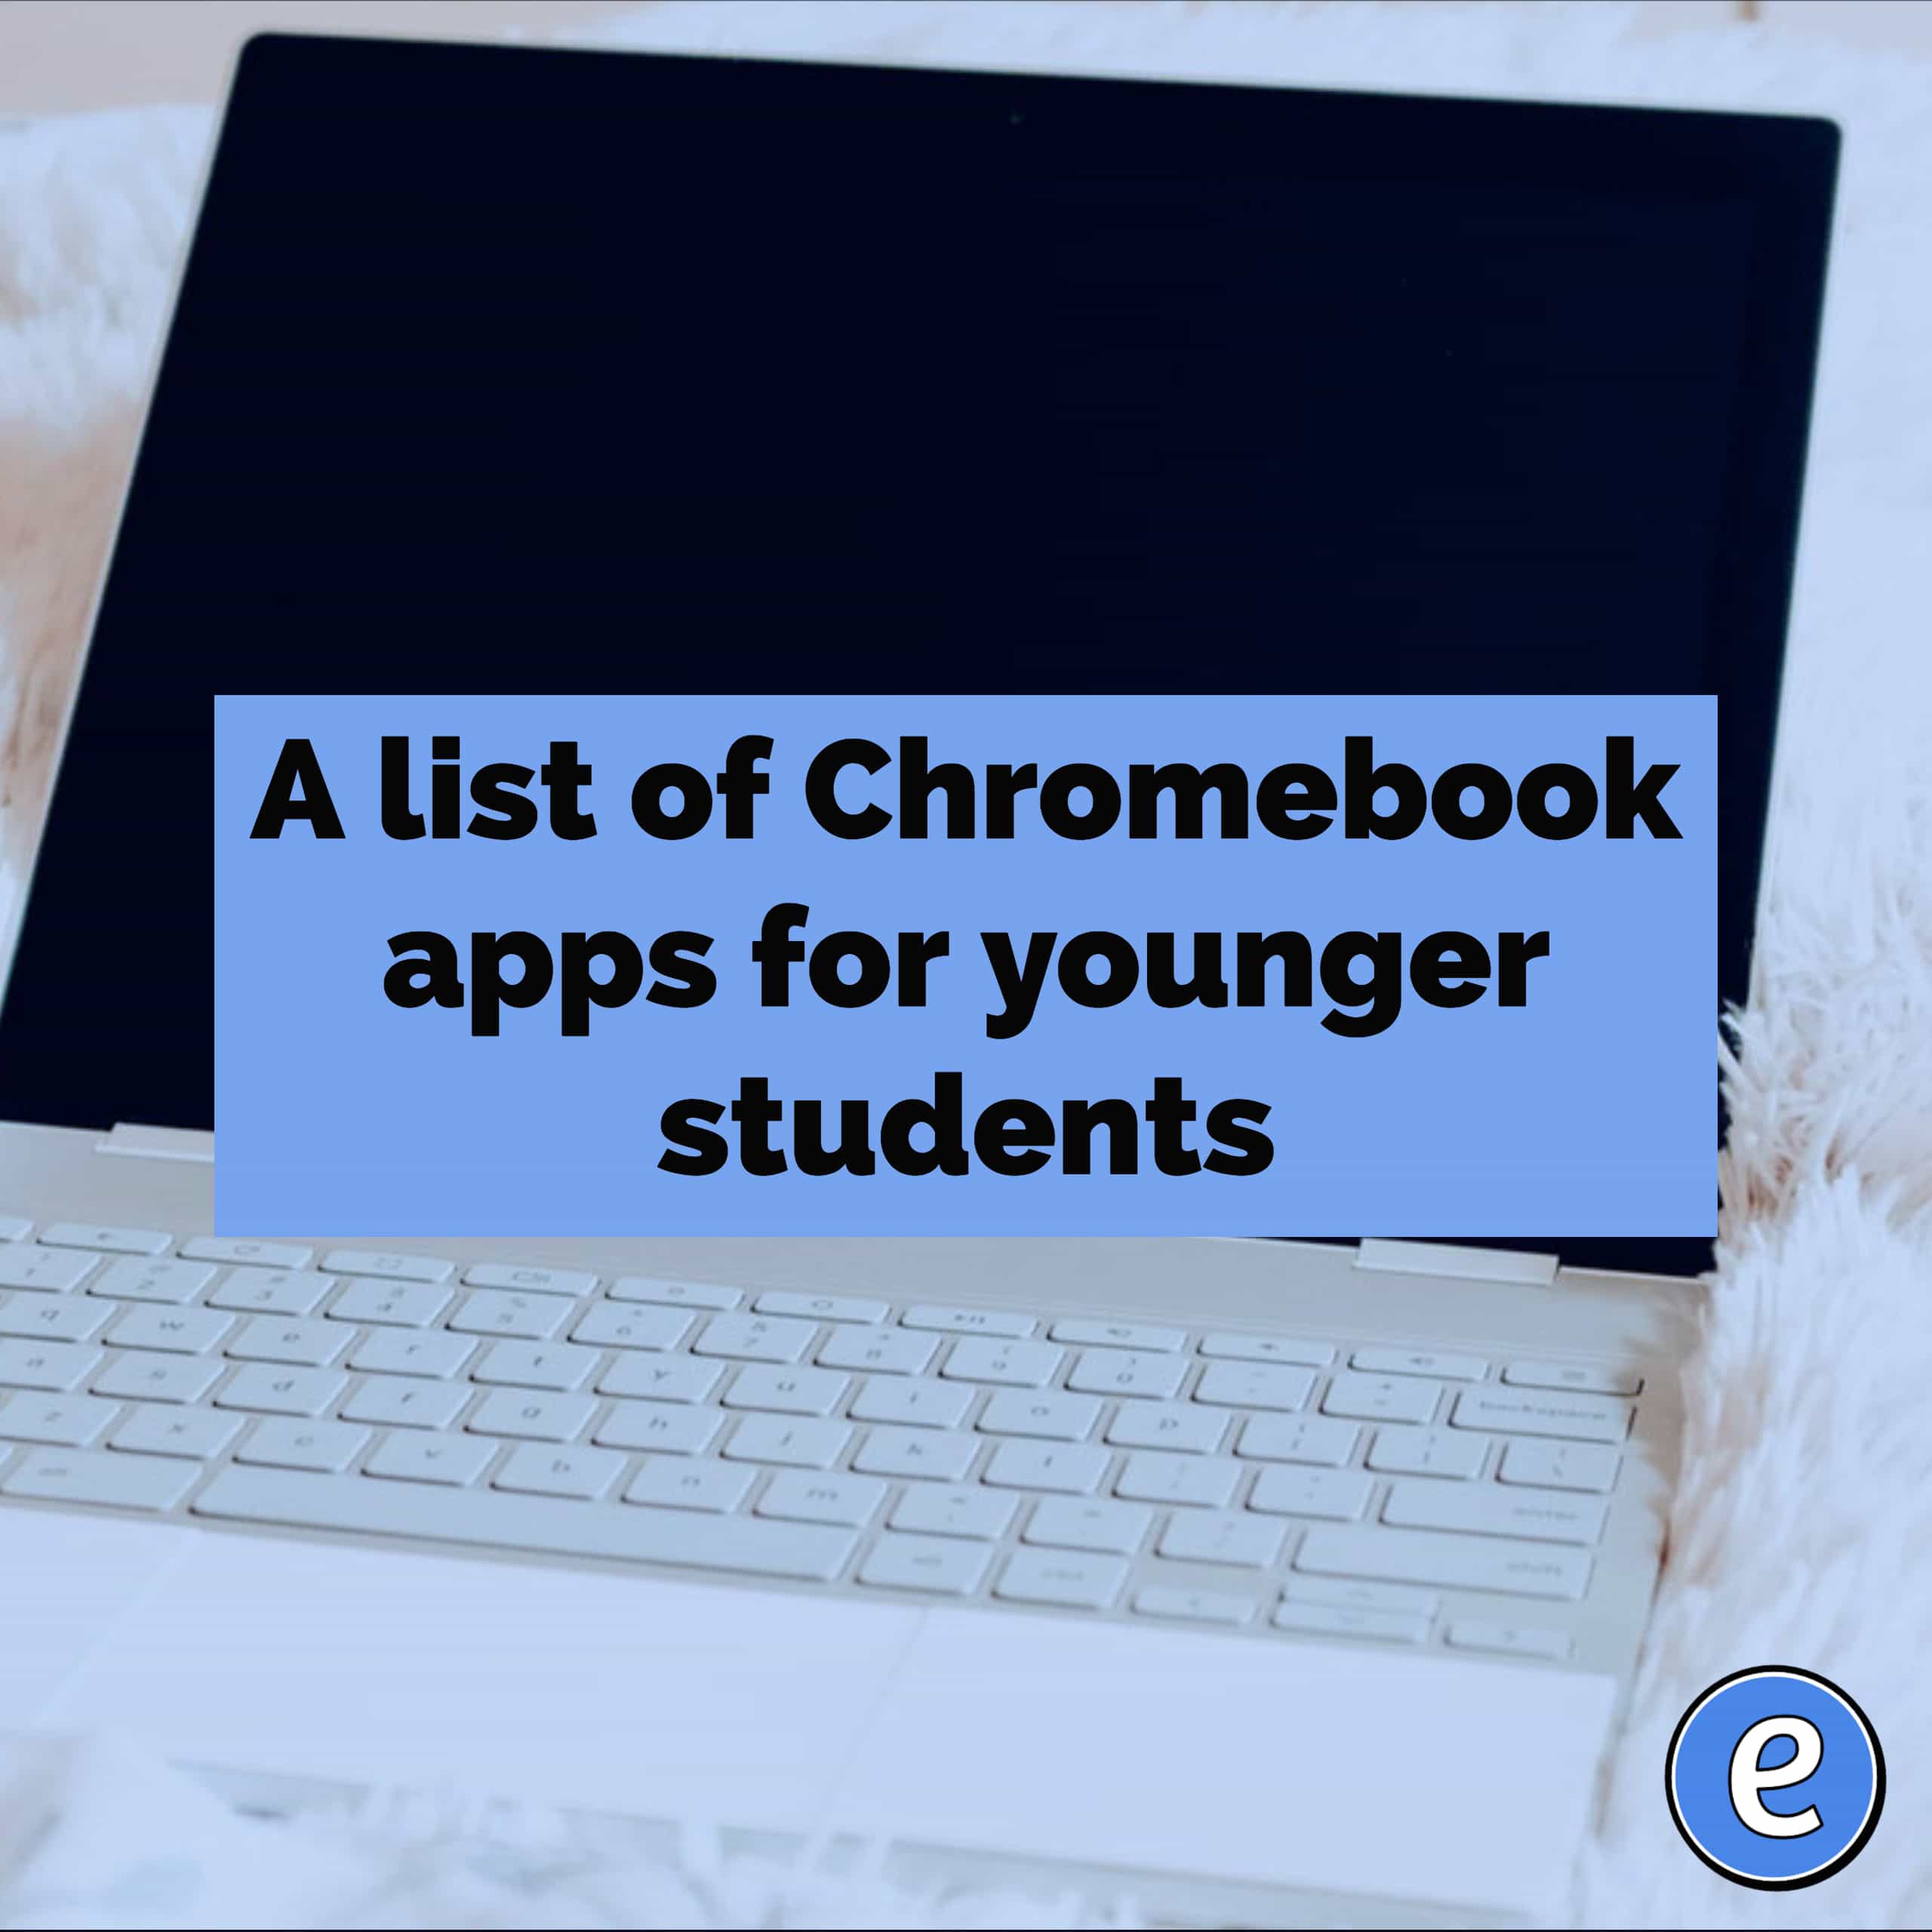 A list of Chromebook apps for younger students